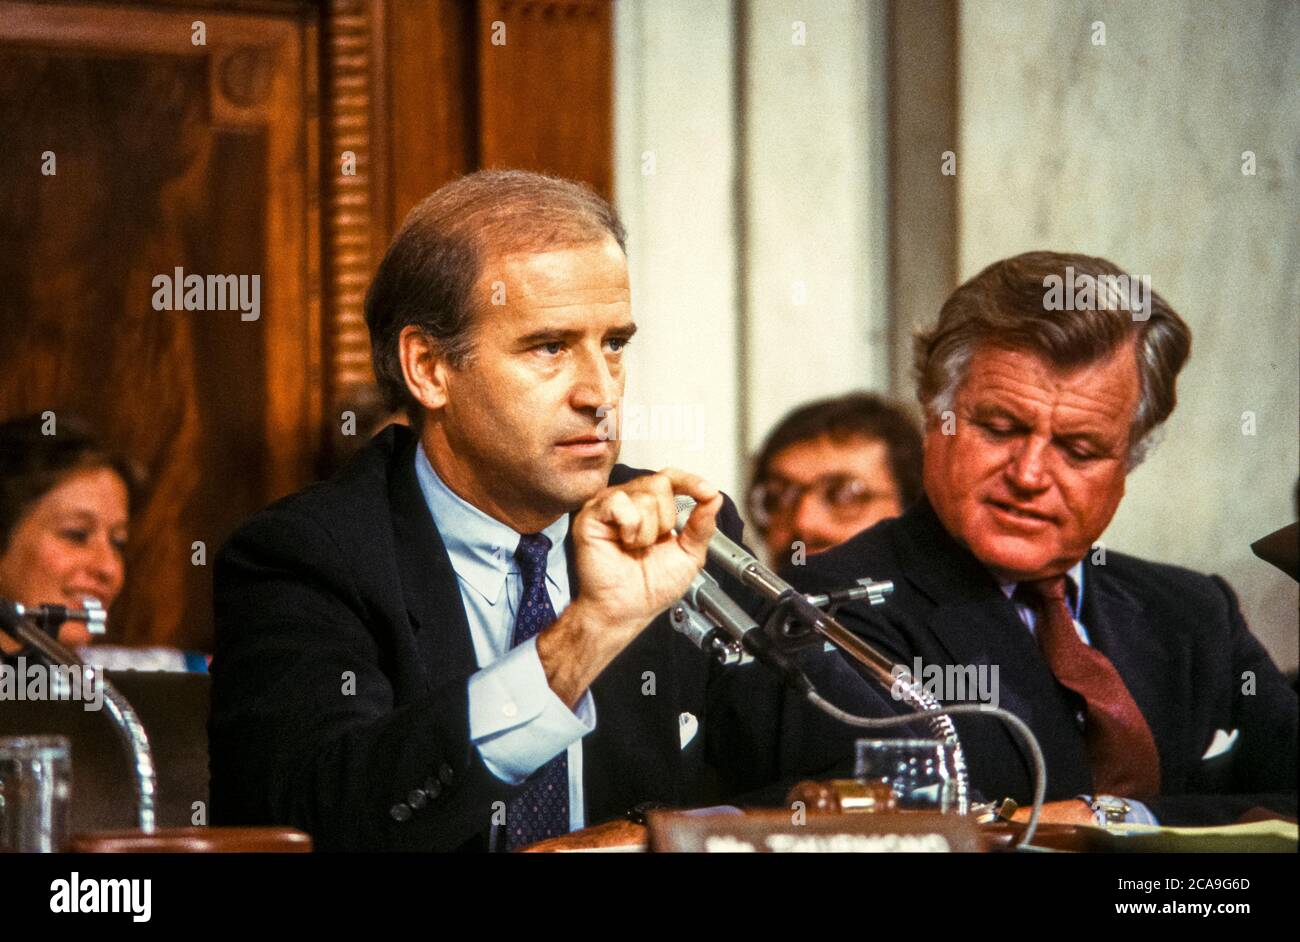 United States Senator Joseph Biden (Democrat of Delaware), Chairman, US Senate Committee on the Judiciary, makes remarks as he chairs the confirmation vote for Judge Robert Bork, US President Ronald Reagan's nominee to succeed Associate Justice of the Supreme Court Louis Powell on Capitol Hill in Washington, DC on October 6, 1987. US Senator Edward M. “Ted” Kennedy (Democrat of Massachusetts) looks on from right.Credit: Ron Sachs/CNP | usage worldwide Stock Photo